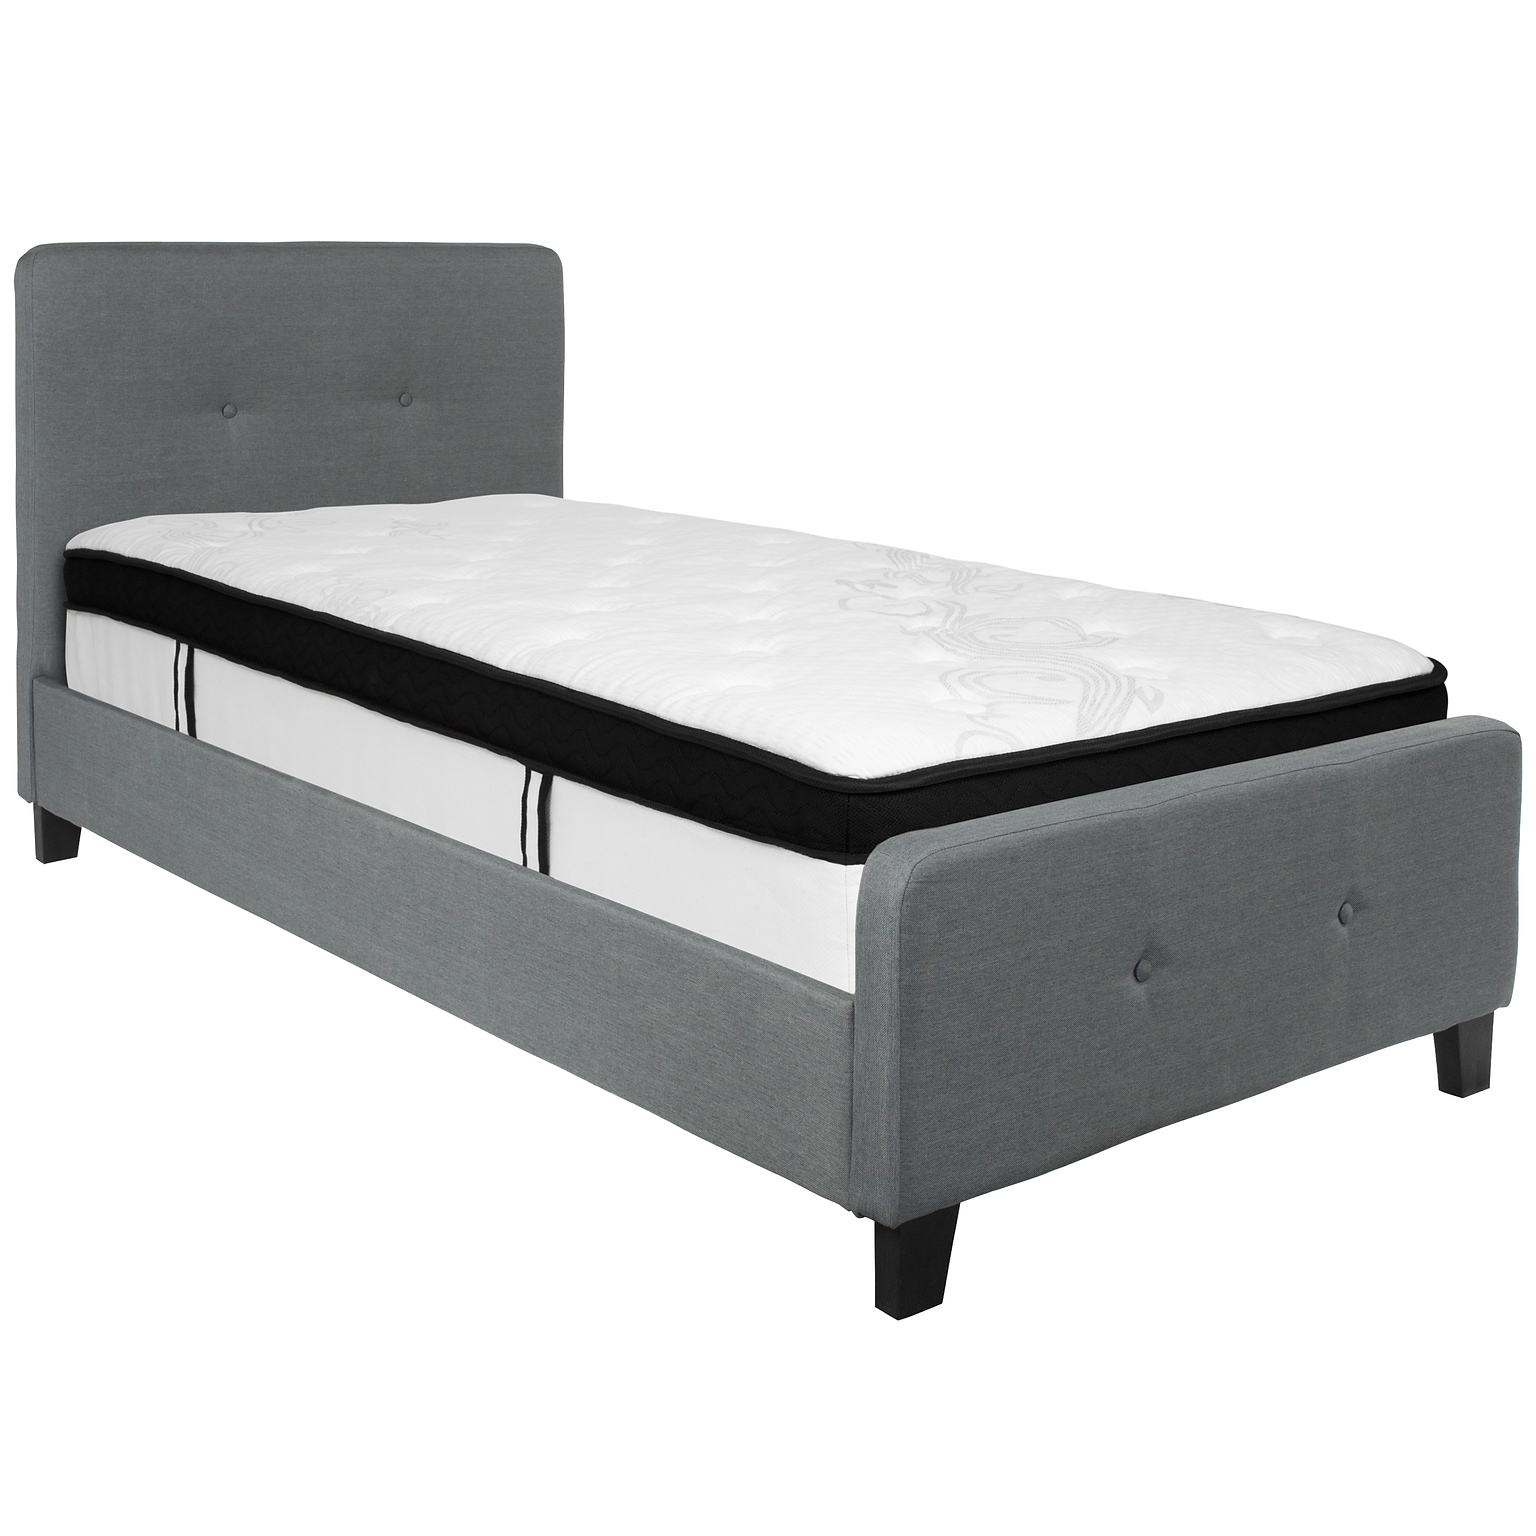 Flash Furniture Tribeca Tufted Upholstered Platform Bed in Dark Gray Fabric with Memory Foam Mattress, Twin (HGBMF29)